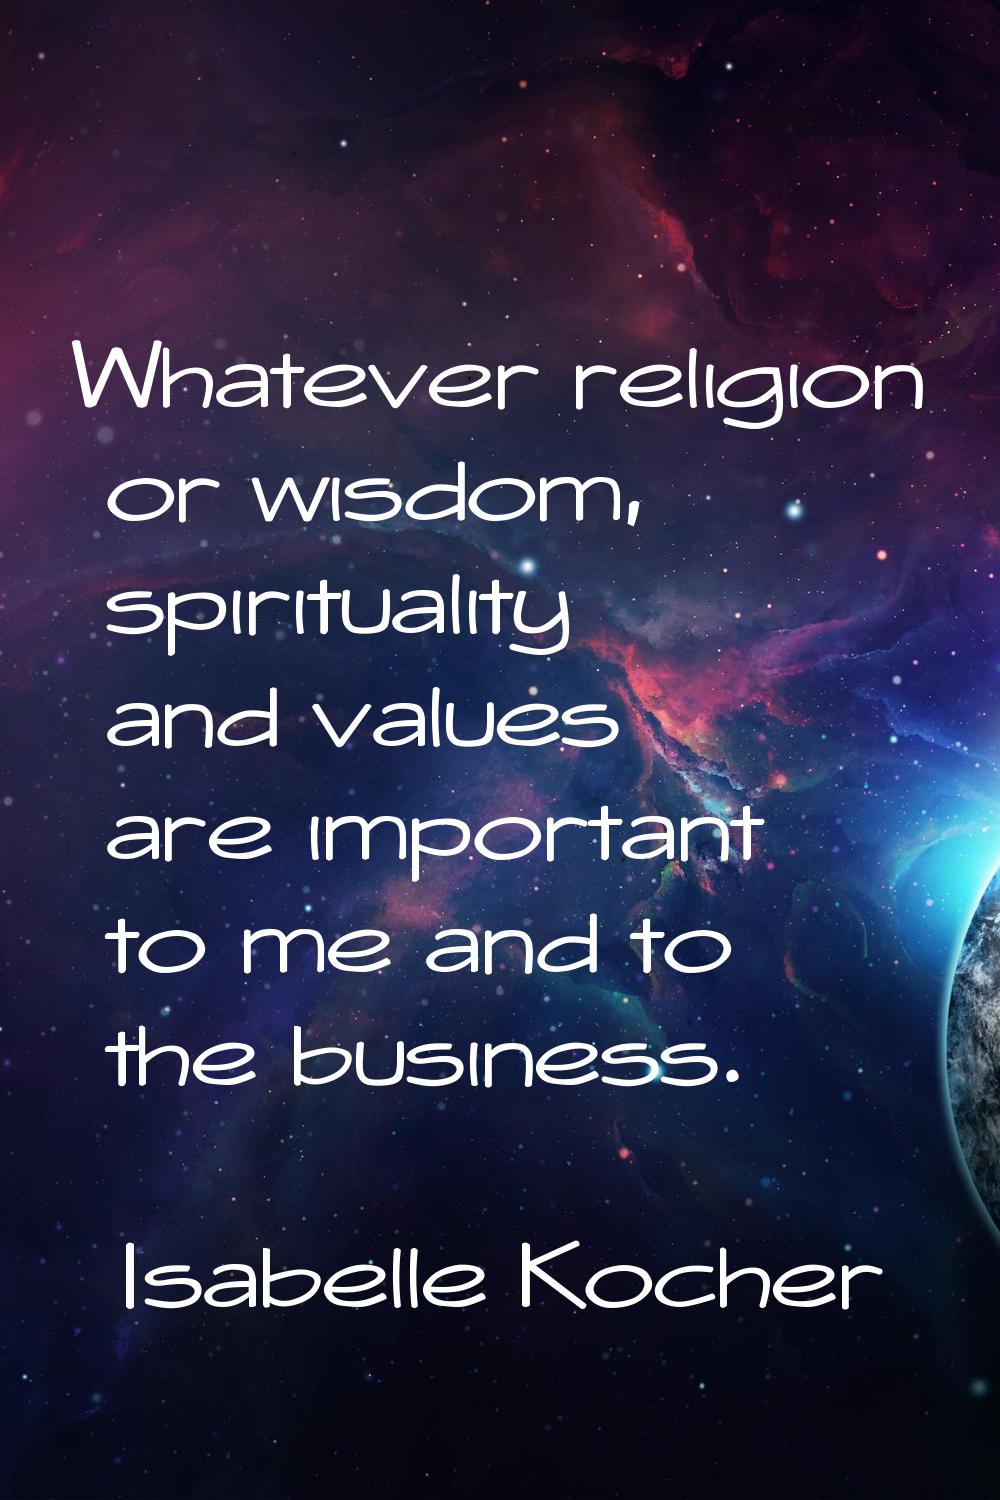 Whatever religion or wisdom, spirituality and values are important to me and to the business.